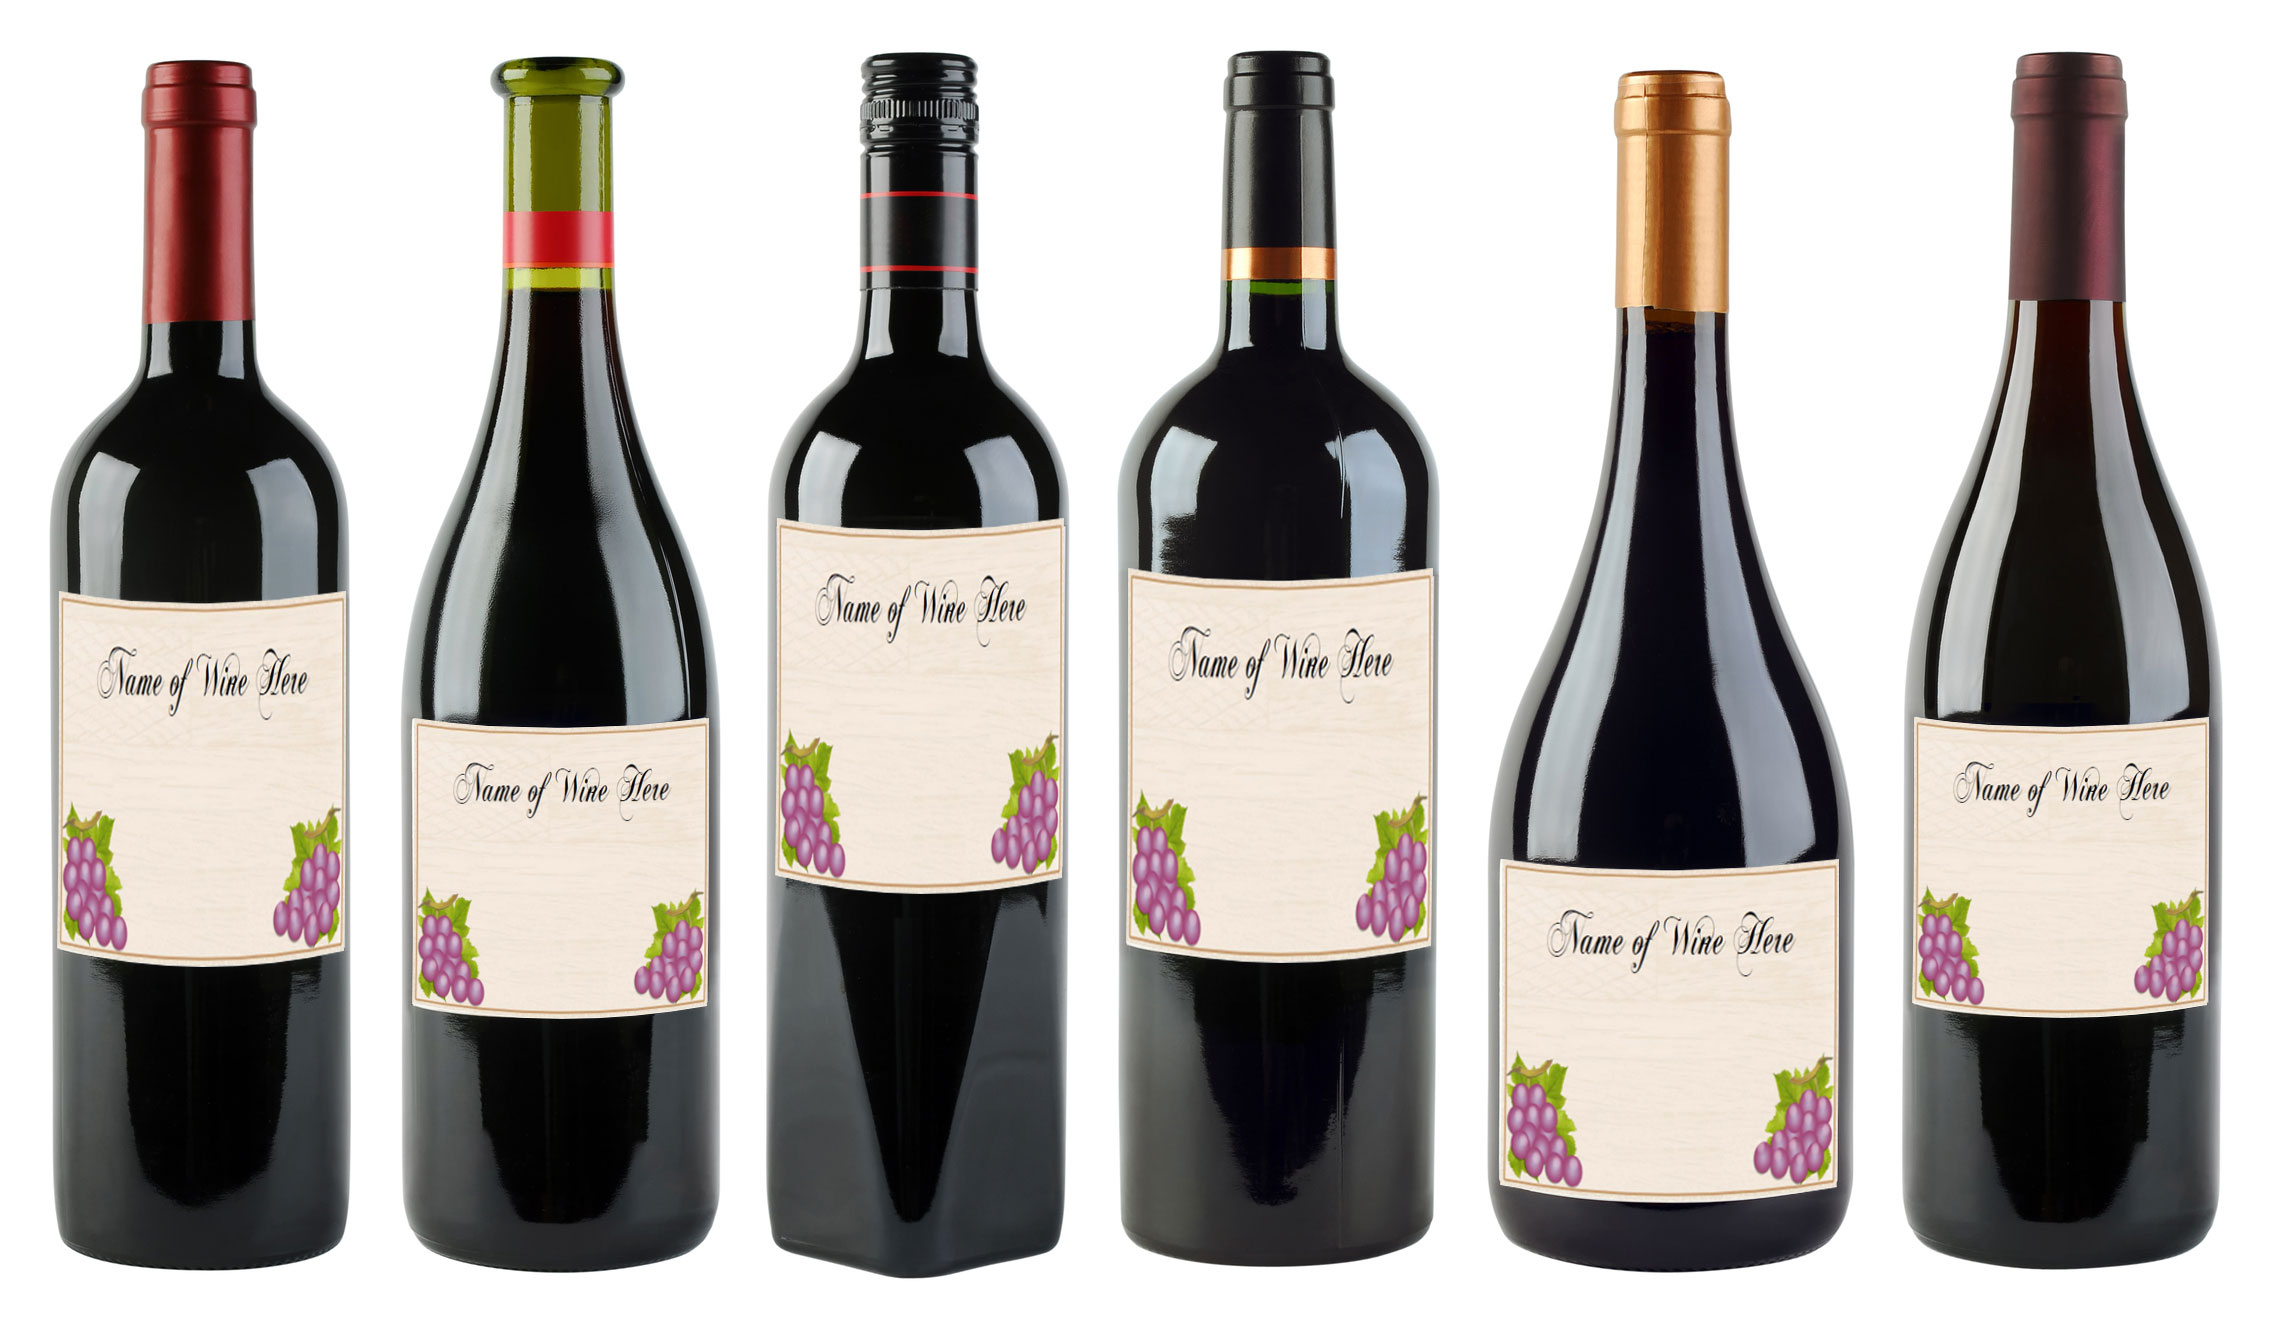 6 Free Printable Wine Labels You Can Customize | Lovetoknow - Free Printable Wine Labels With Photo